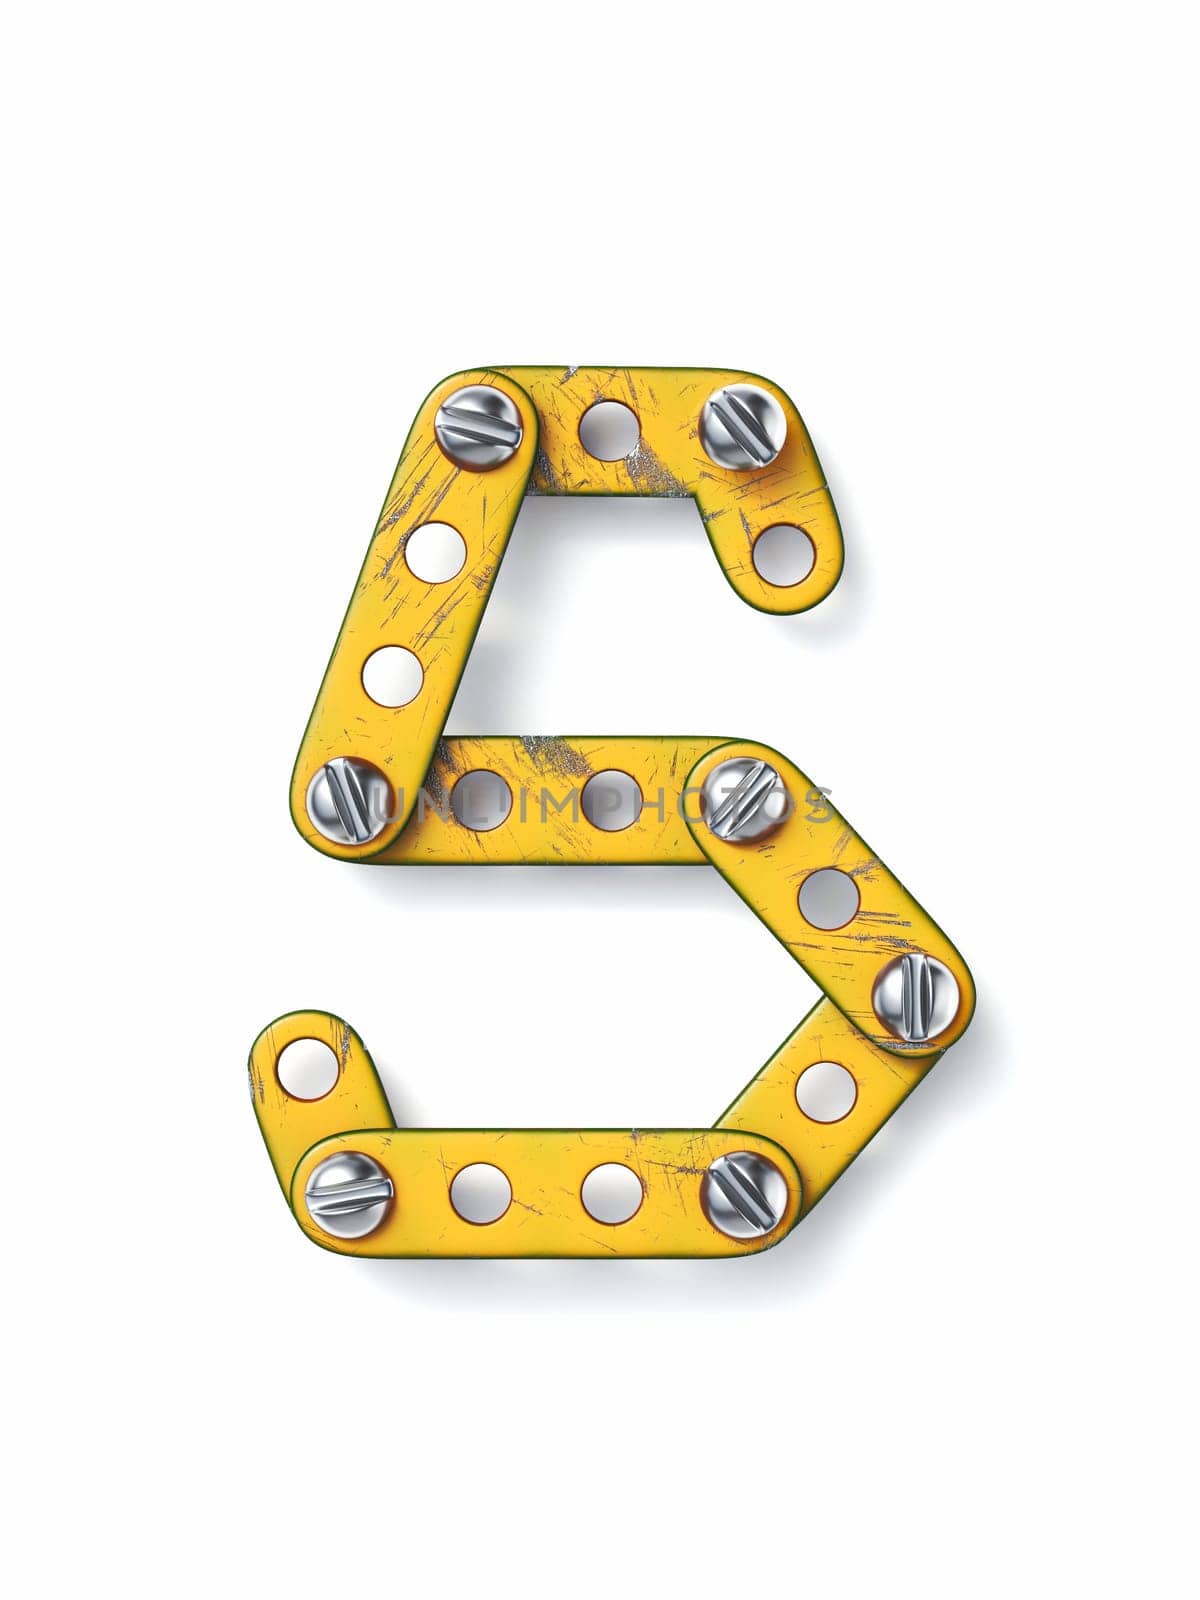 Aged yellow constructor font Letter S 3D by djmilic